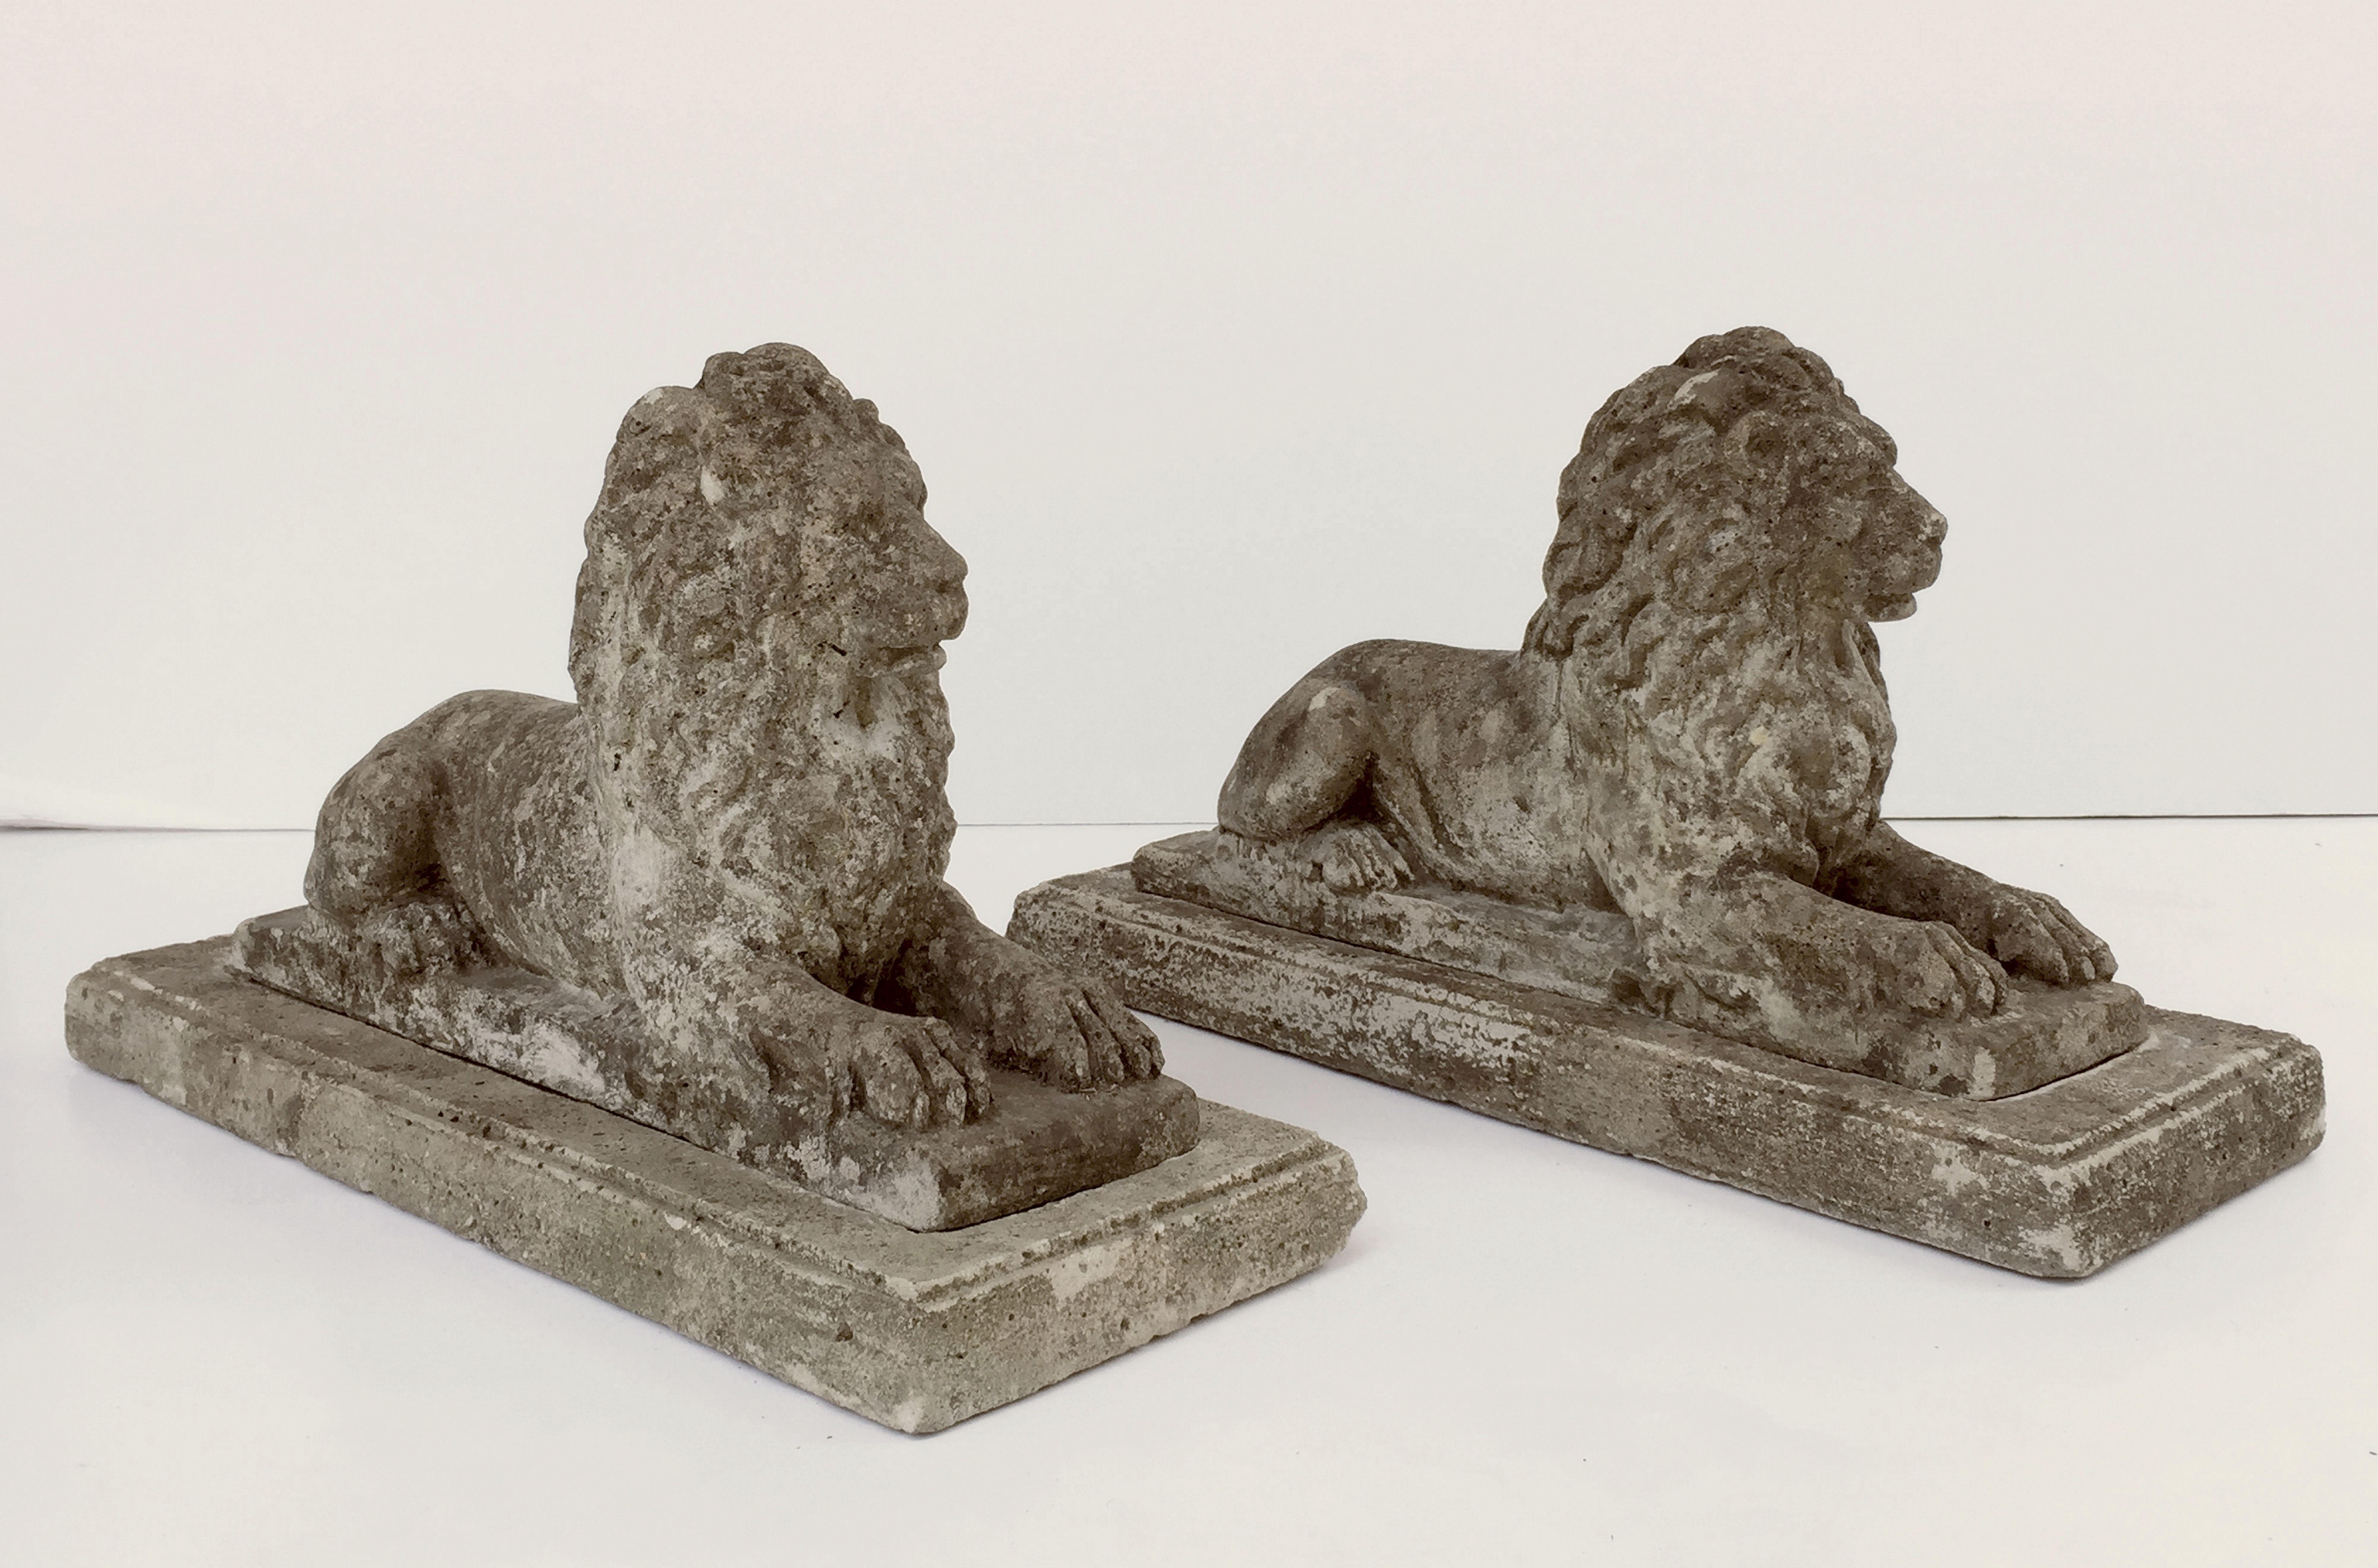 English Garden Stone Lions on Plinths 'Priced as a Pair' 3